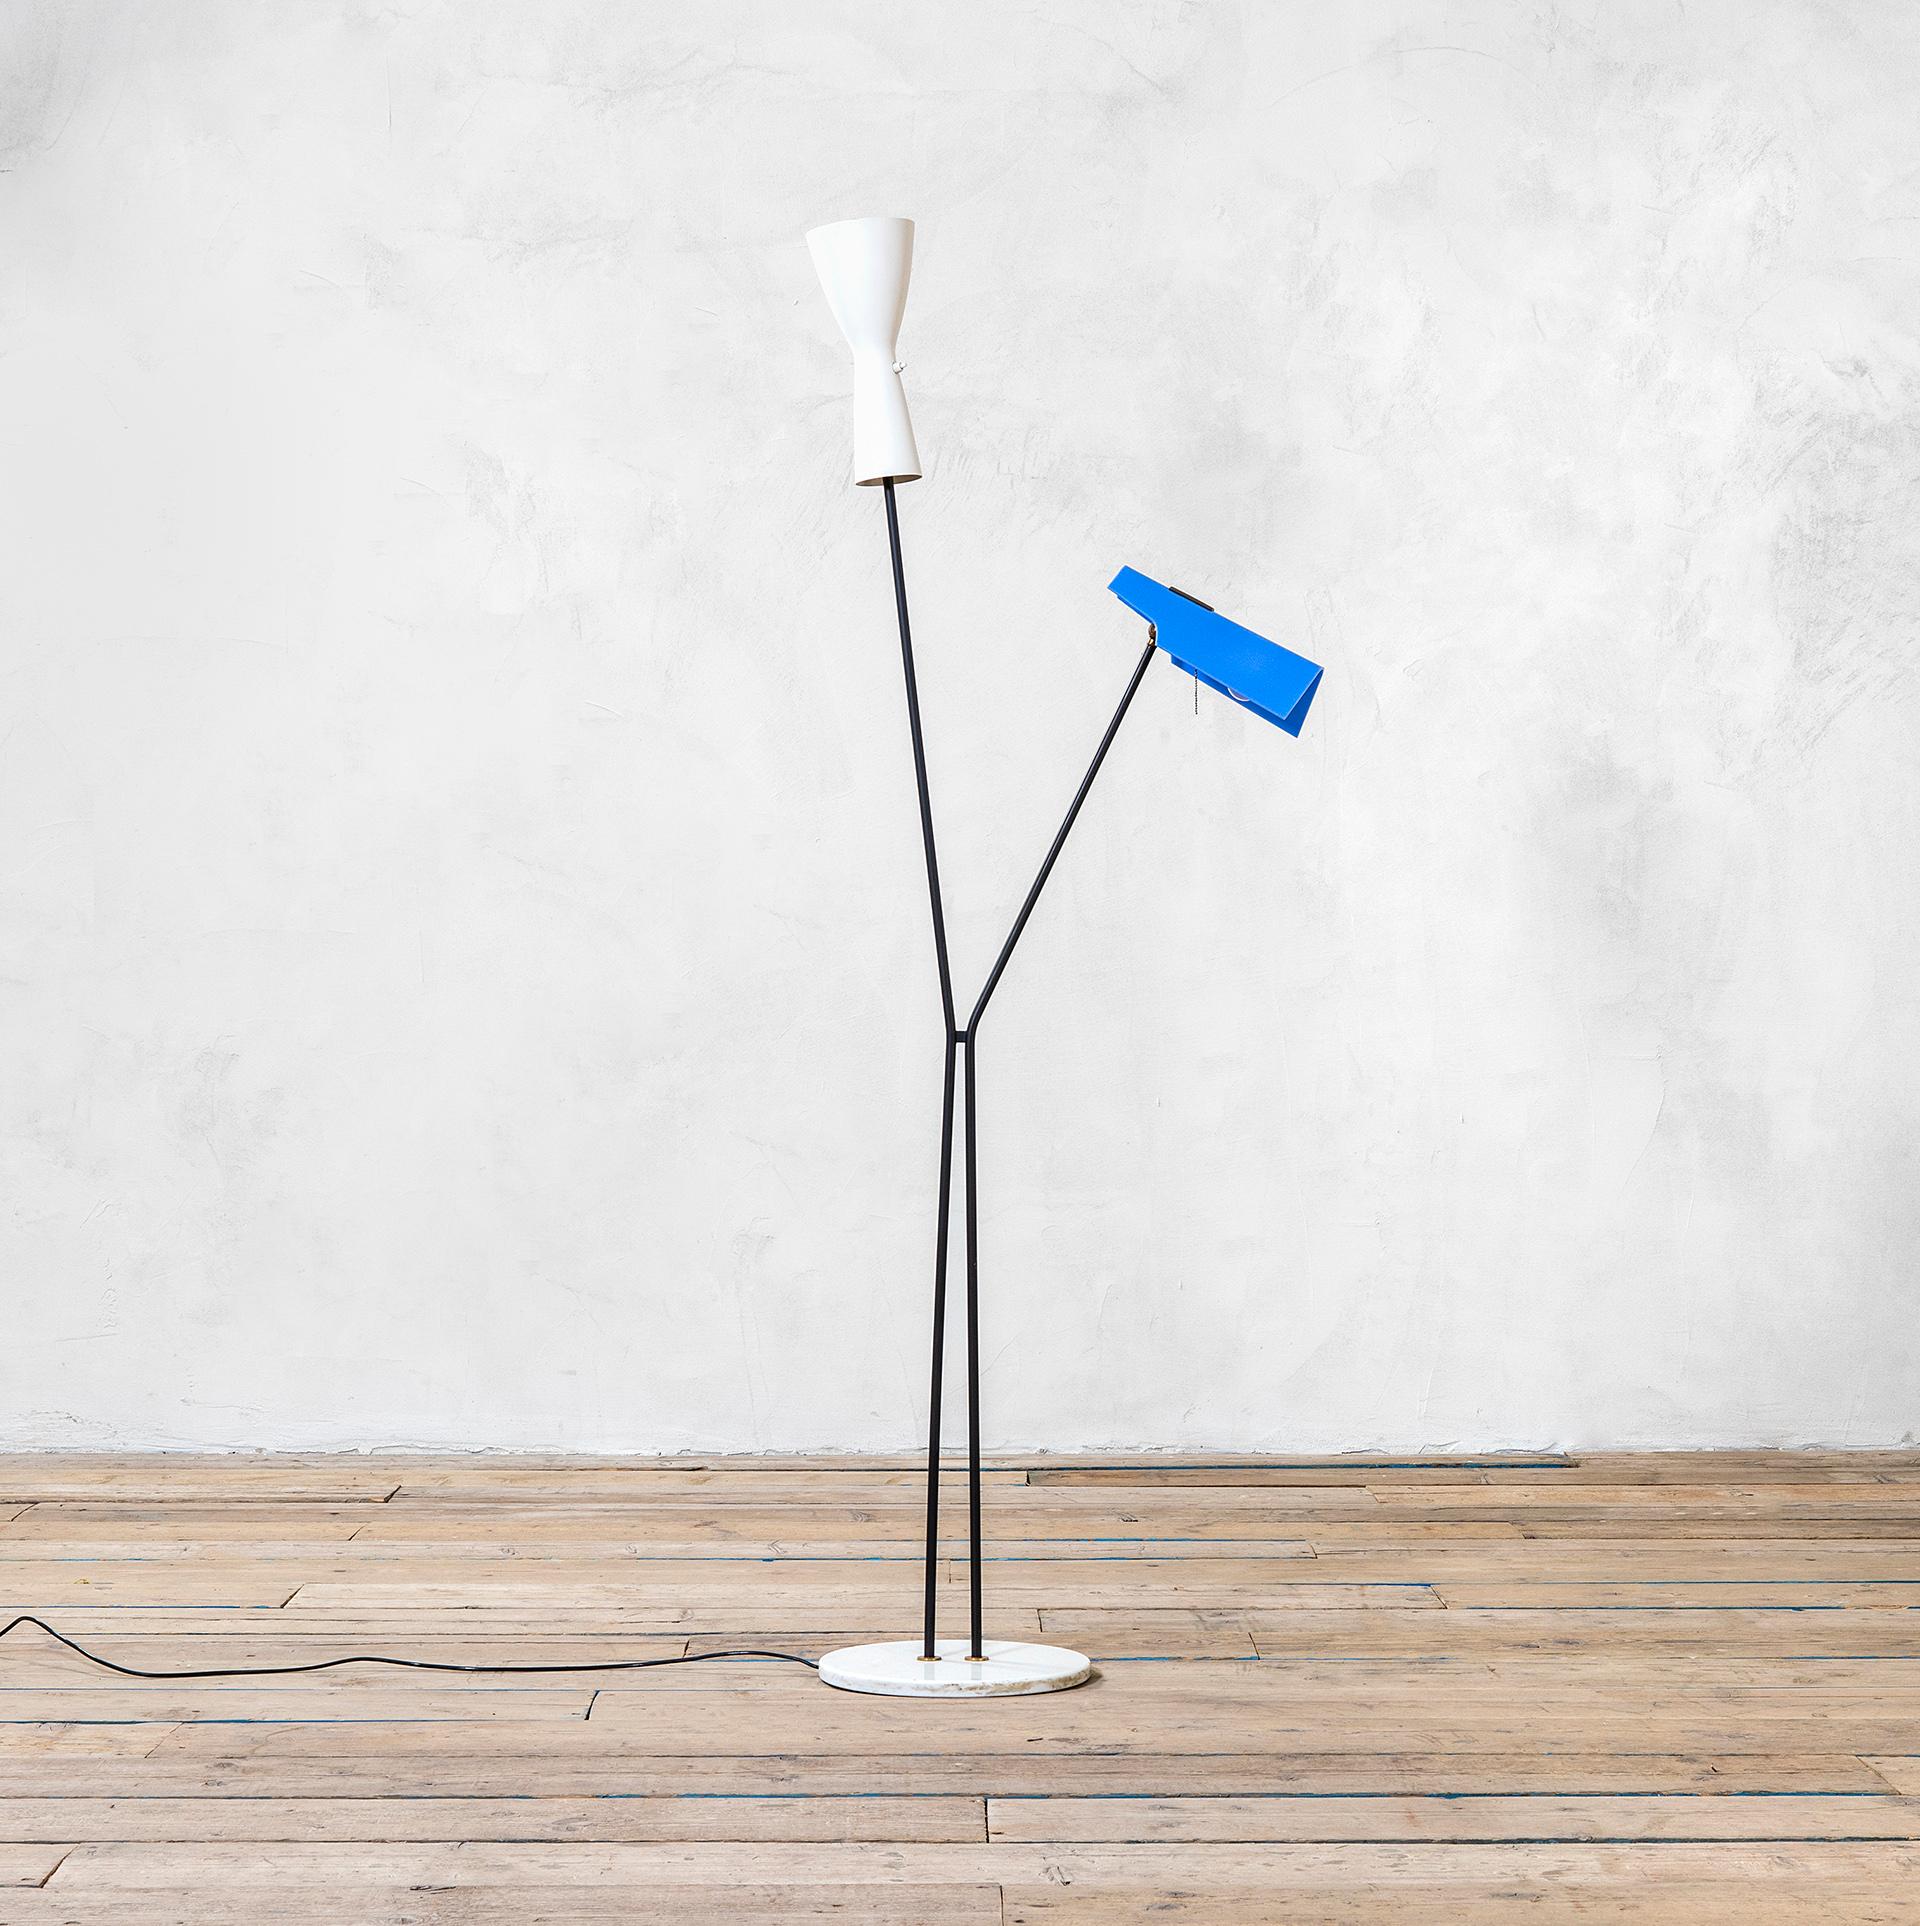 Floor lamp designed in 1950s and signed by Stilnovo (Trademark Stilnovo still in) with two diffusers. The floor lamp has a marble base, lacquered metal support and diffuser, plastic lens hood. Very good condition, fully working.
The light can be